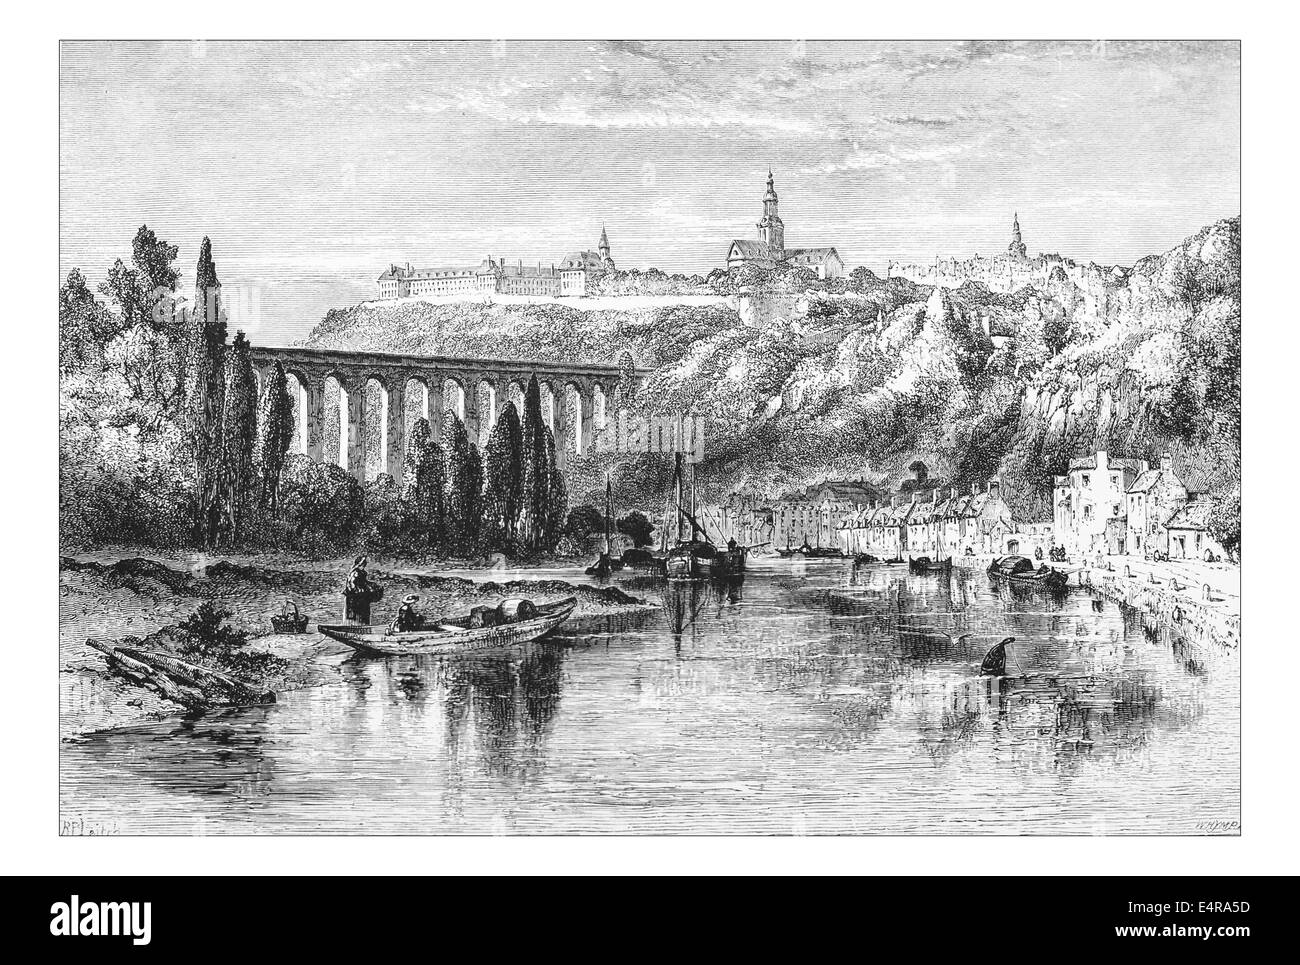 Dinan, France Illustration from 'The British isles - Cassell Petter & Galpin Part 8 Picturesque Europe. Picturesque Europe was an illustrated set of Magazines published by Cassell, Petter, Galpin & Co. of London, Paris and New York in 1877. The publications depicted tourist haunts in Europe, with text descriptions and steel and wood engravings by eminent artists of the time, such as Harry Fenn, William H J Boot, Thomas C. L. Rowbotham, Henry T. Green , Myles B. Foster, John Mogford , David H. McKewan, William L. Leitch, Edmund M. Wimperis and Joseph B. Smith. Stock Photo